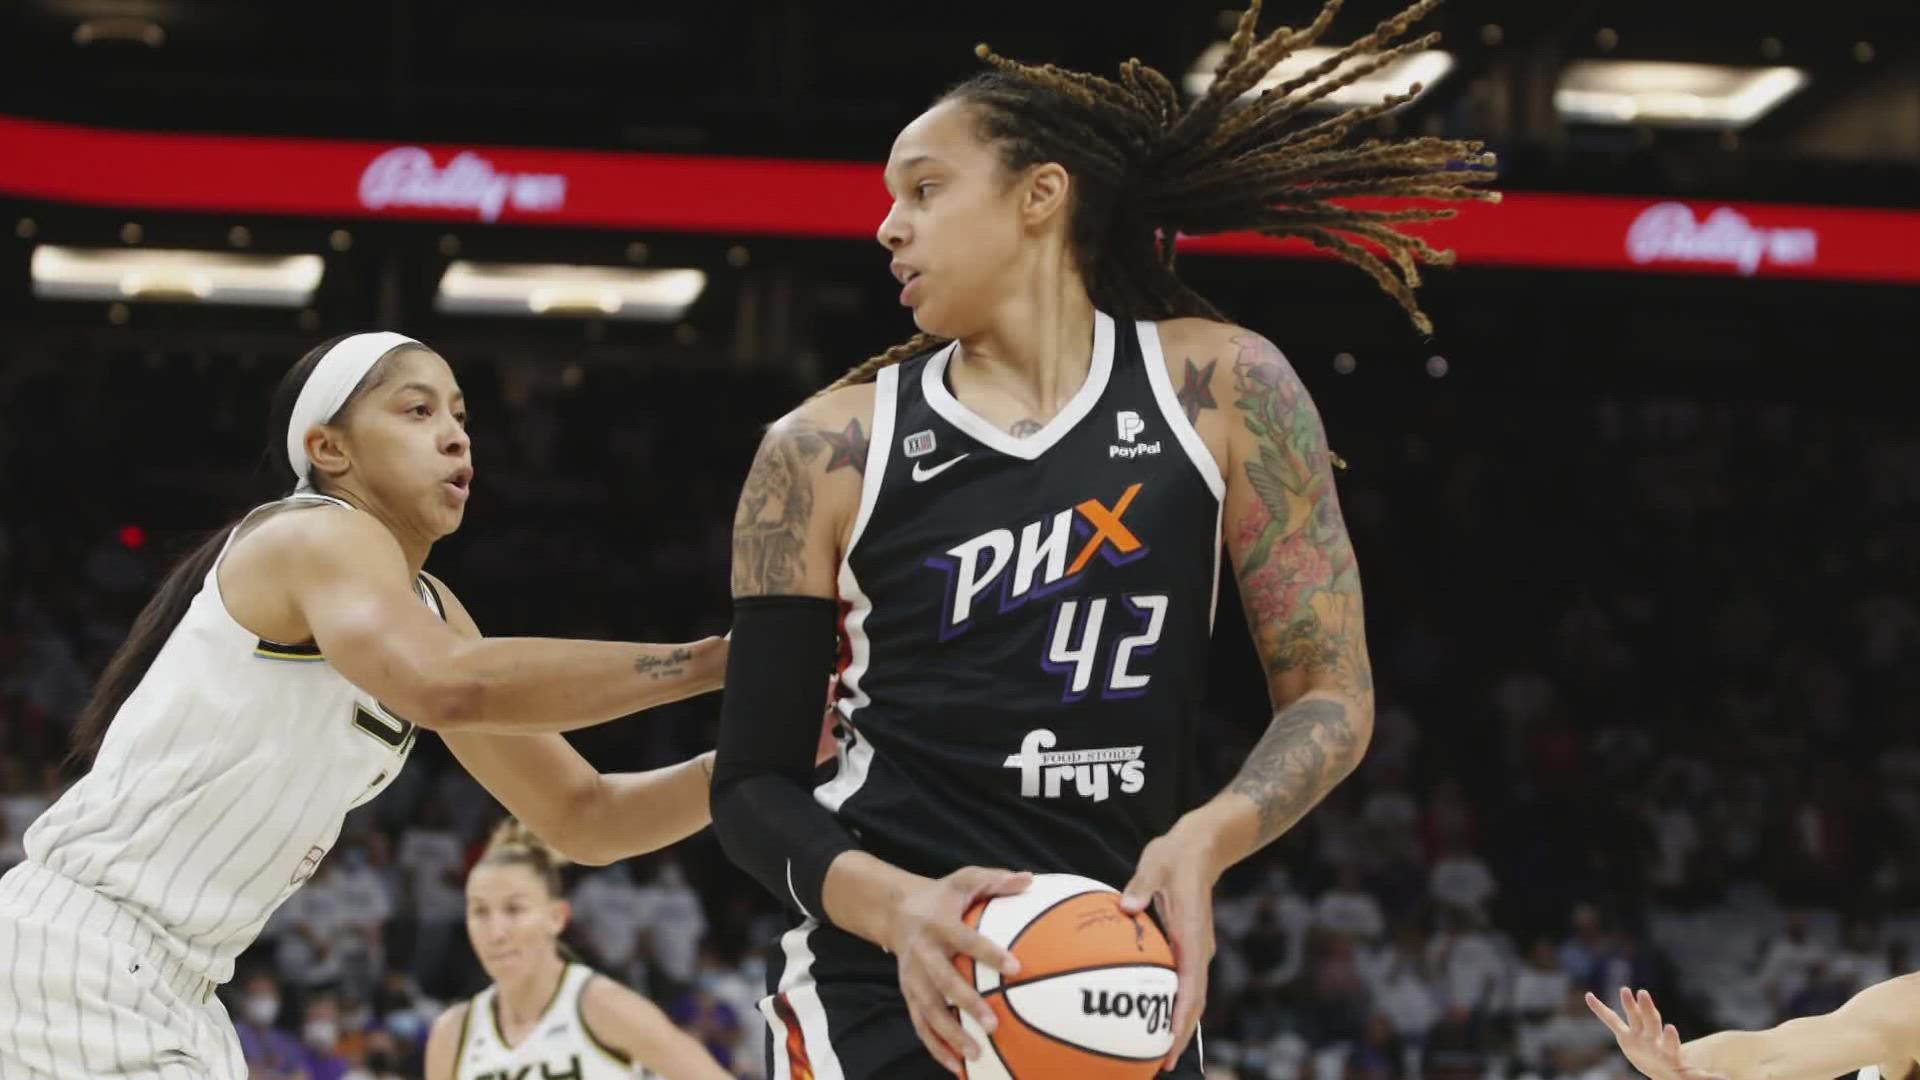 Griner was taken into custody in Moscow in February on drug charges, but news of her detainment broke in early March. She faces up to 10 years in prison.